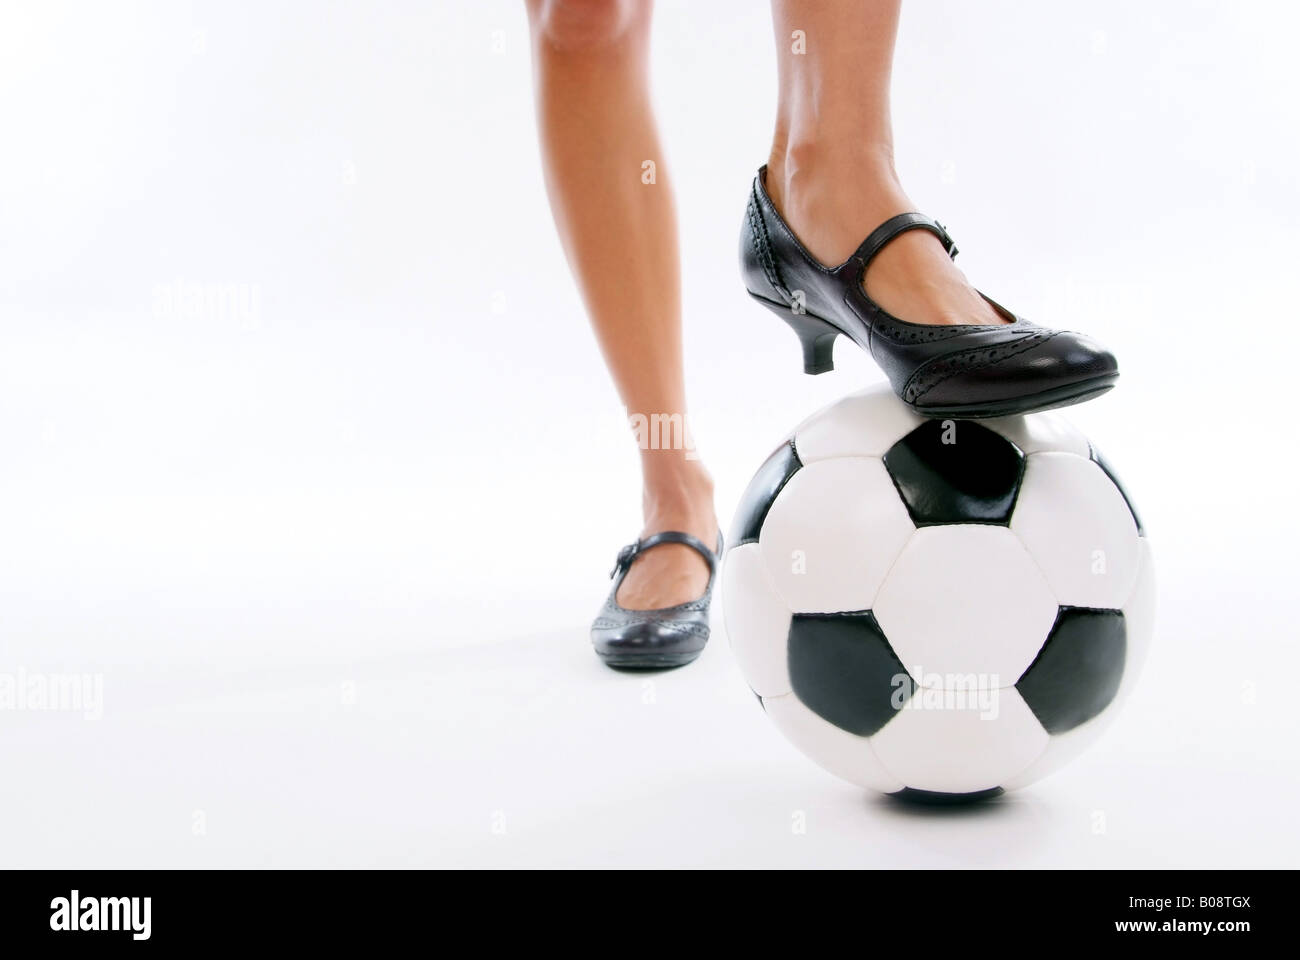 woman legs in high heeled shoes with soccer ball Stock Photo